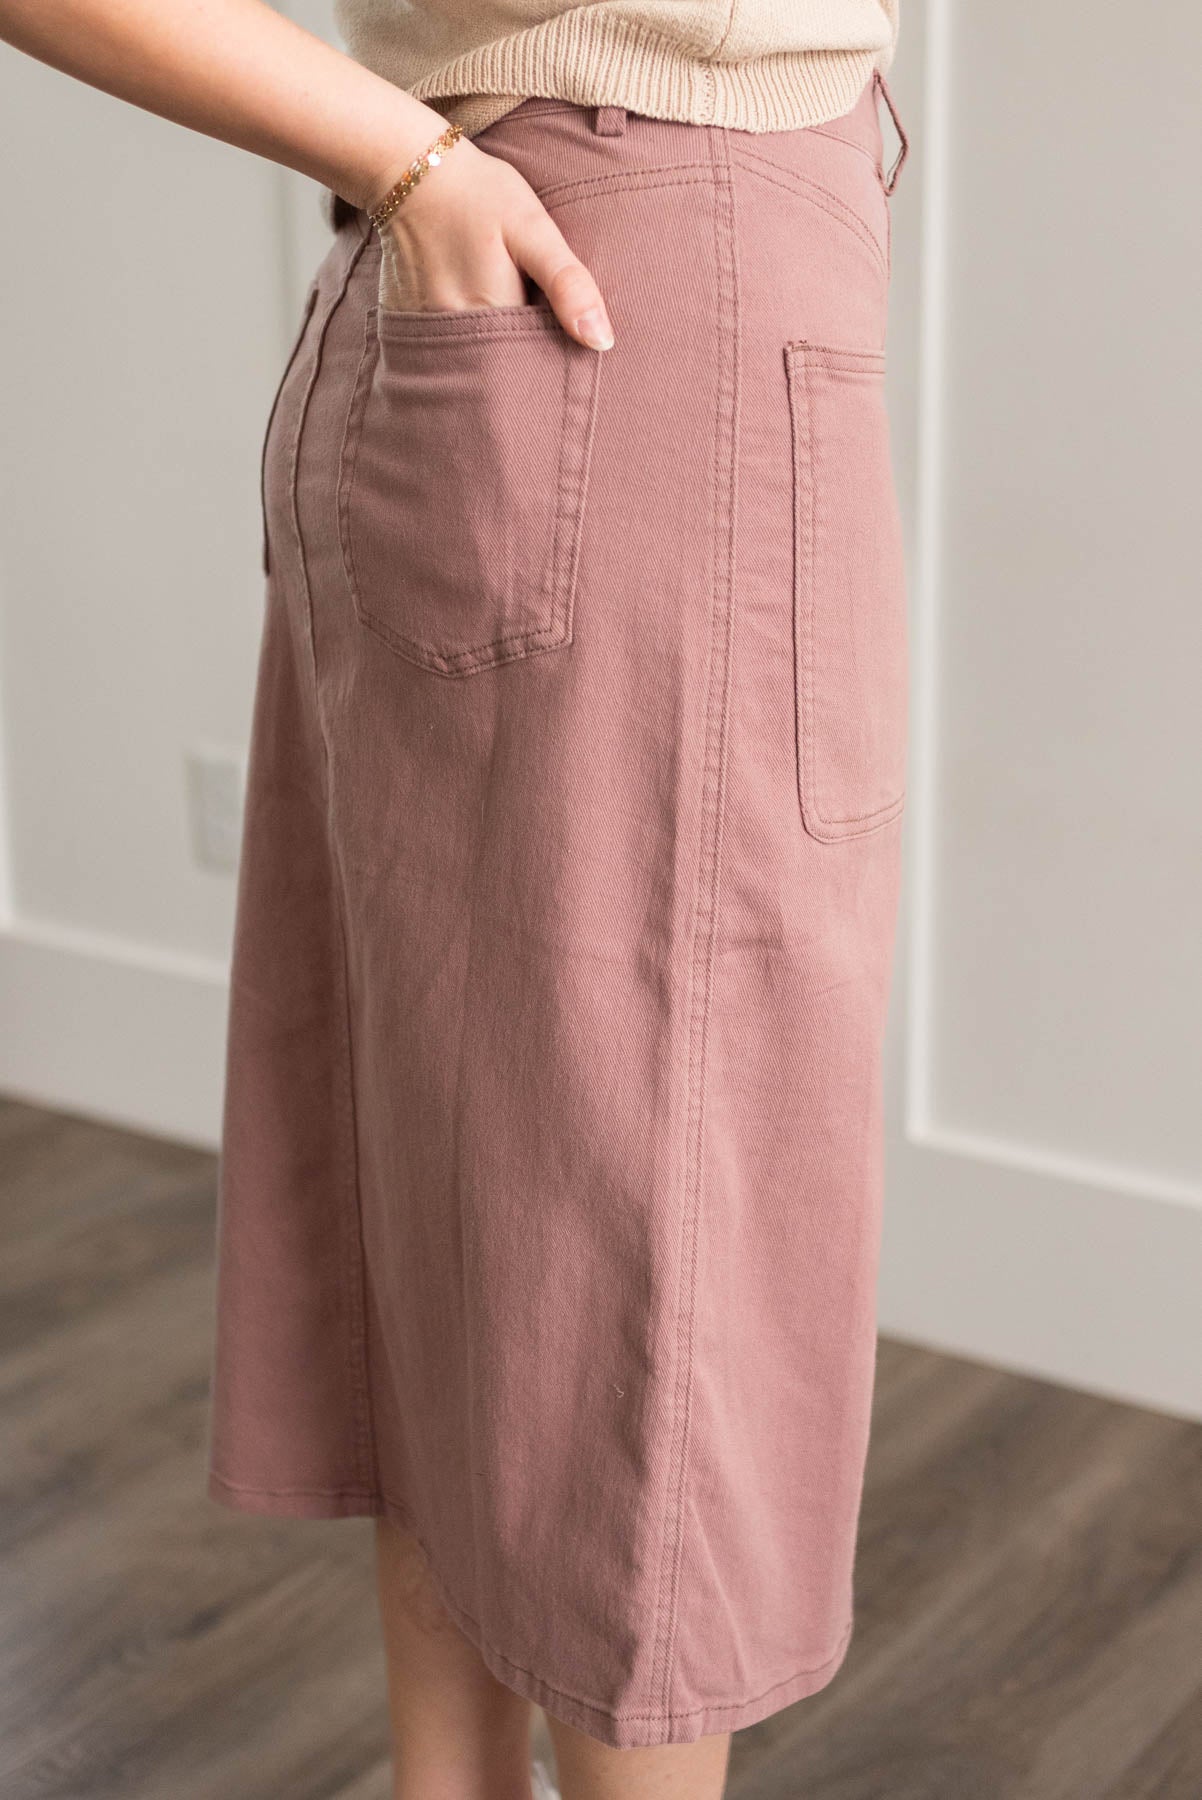 Side view of the mauve maxi skirt